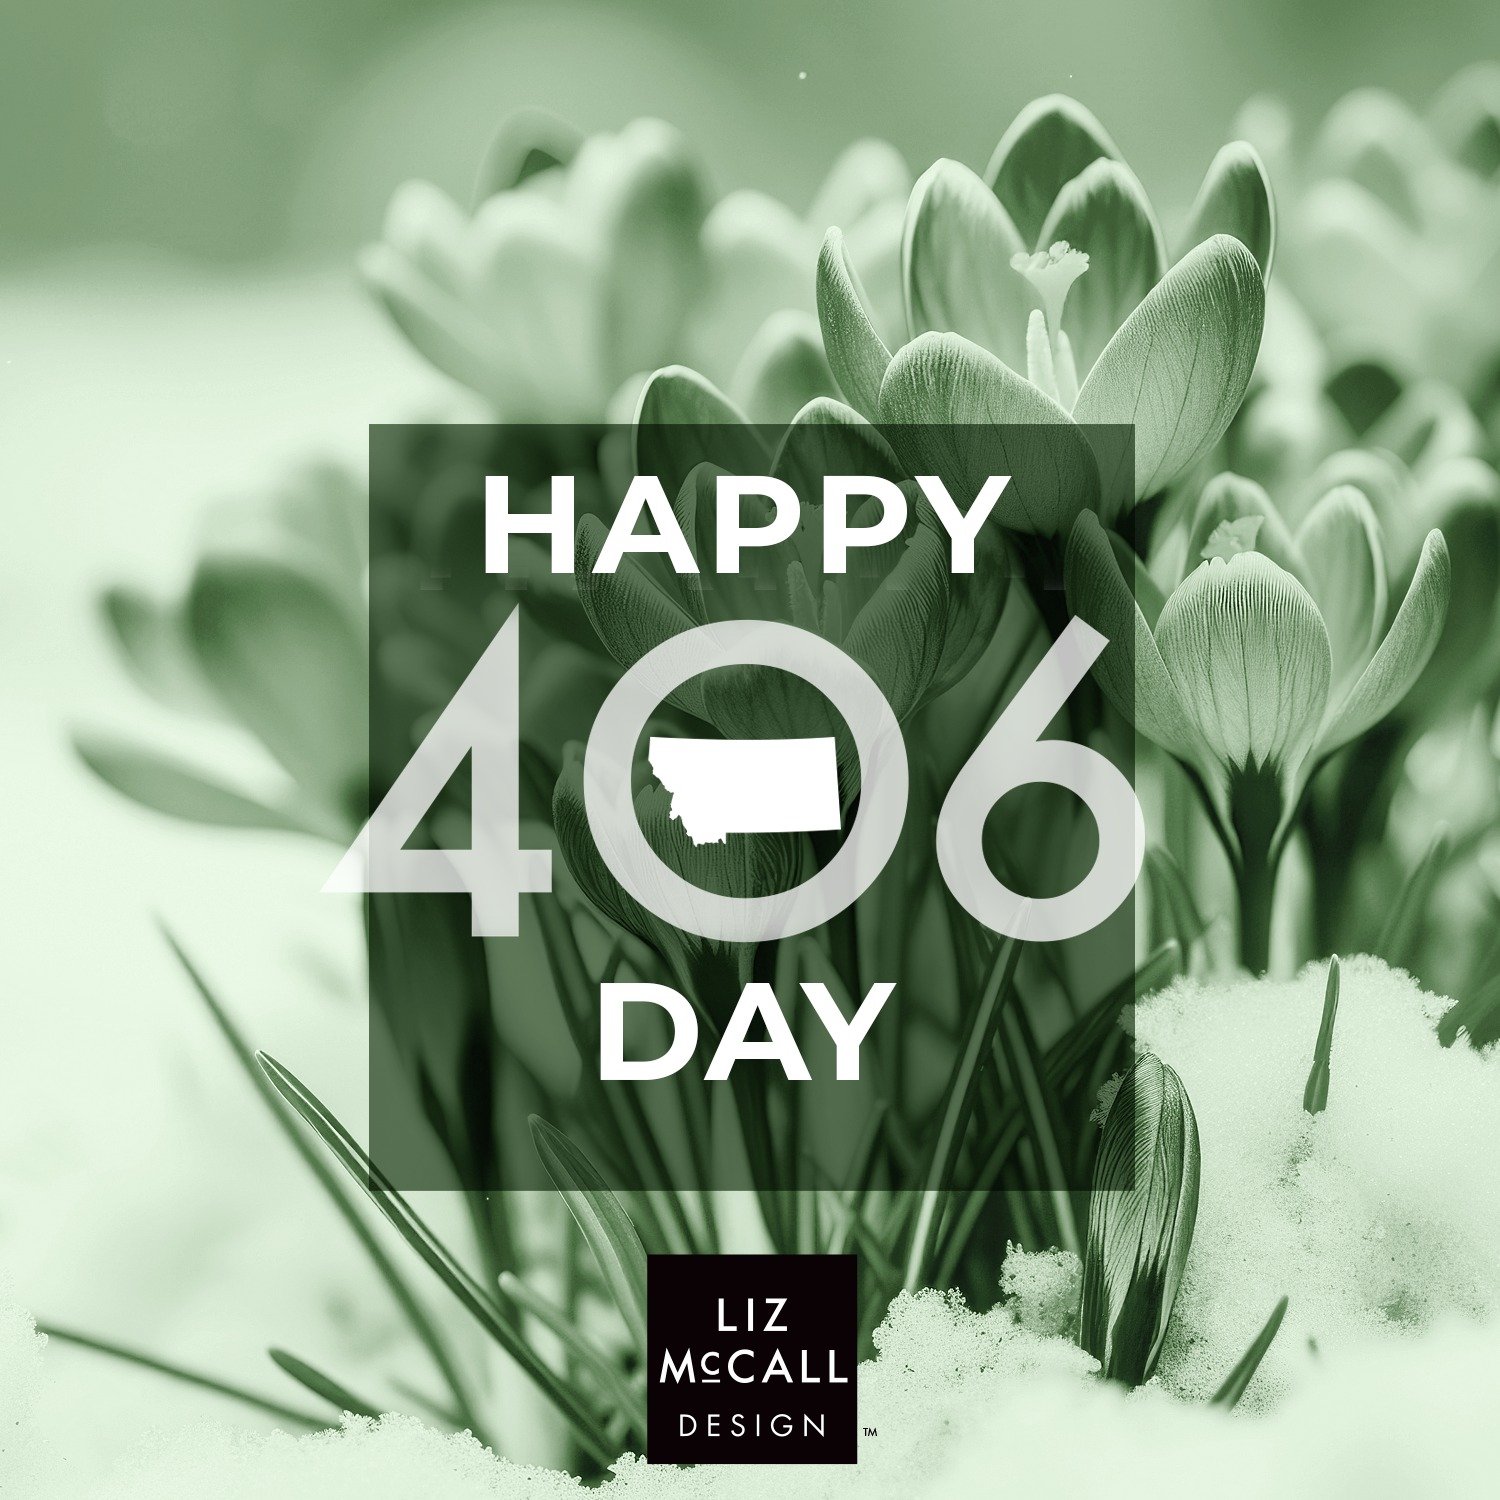 Wishing you a happy and snowy 406 Day!
One area code covers Montana &ndash; 406
Number of square miles &ndash; 147,040
Number of residents &ndash; 1,122,867
  7.6 residents per square mile
4th largest state
Number of cattle &ndash; 2.16 million 
  14